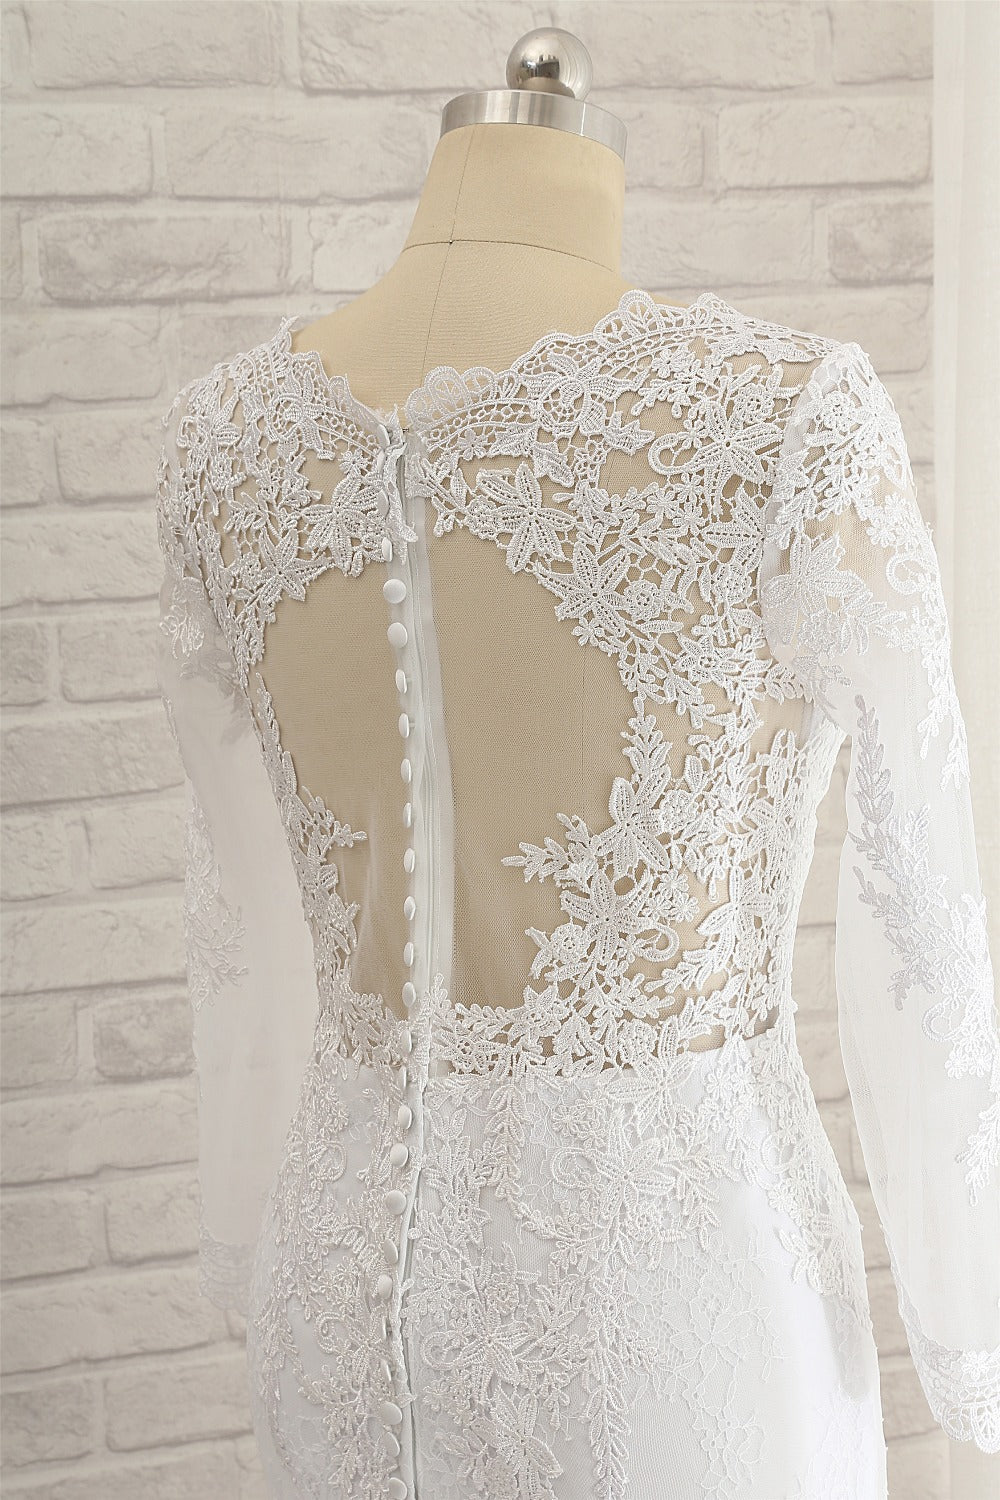 Load image into Gallery viewer, Stunning Jewel Long Sleeves Tulle Lace Wedding Dress Mermaid Jewel Appliques Bridal Gowns On Sale-27dress
